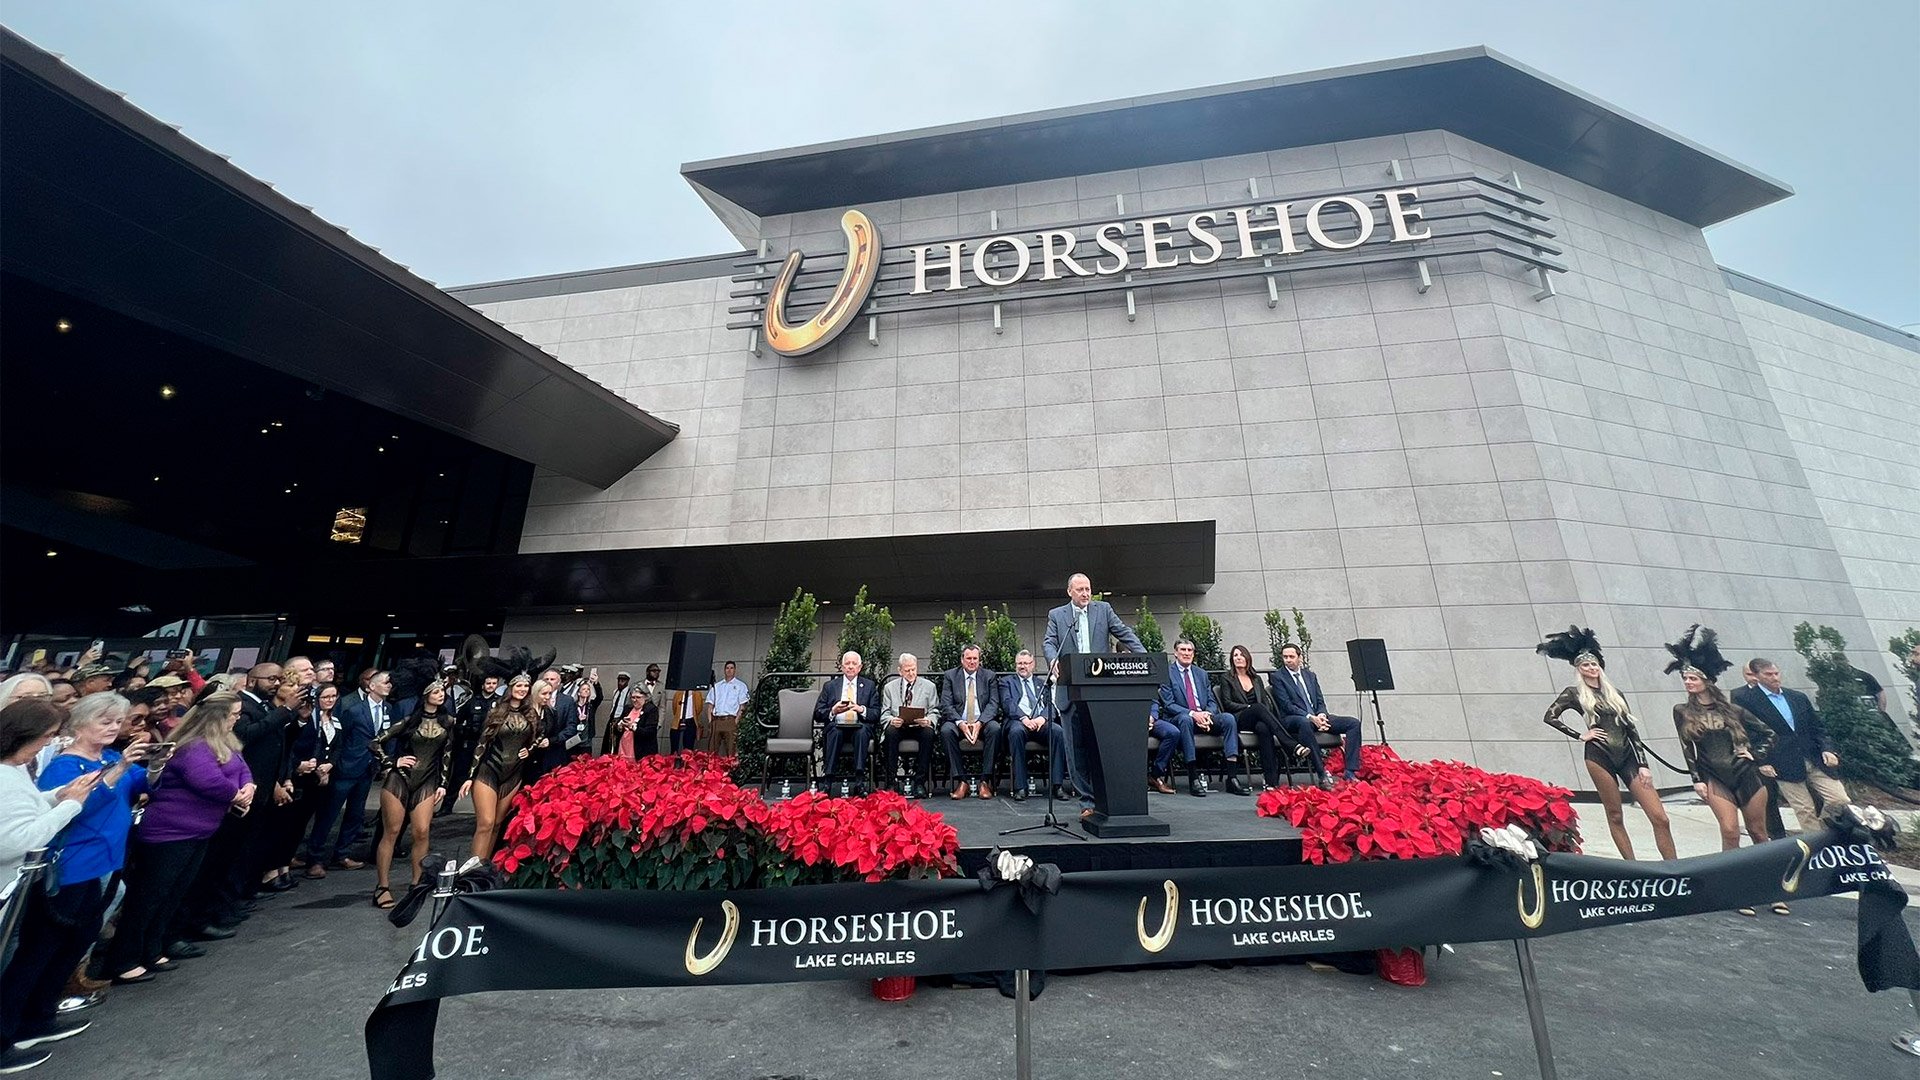 is the horseshoe casino open today